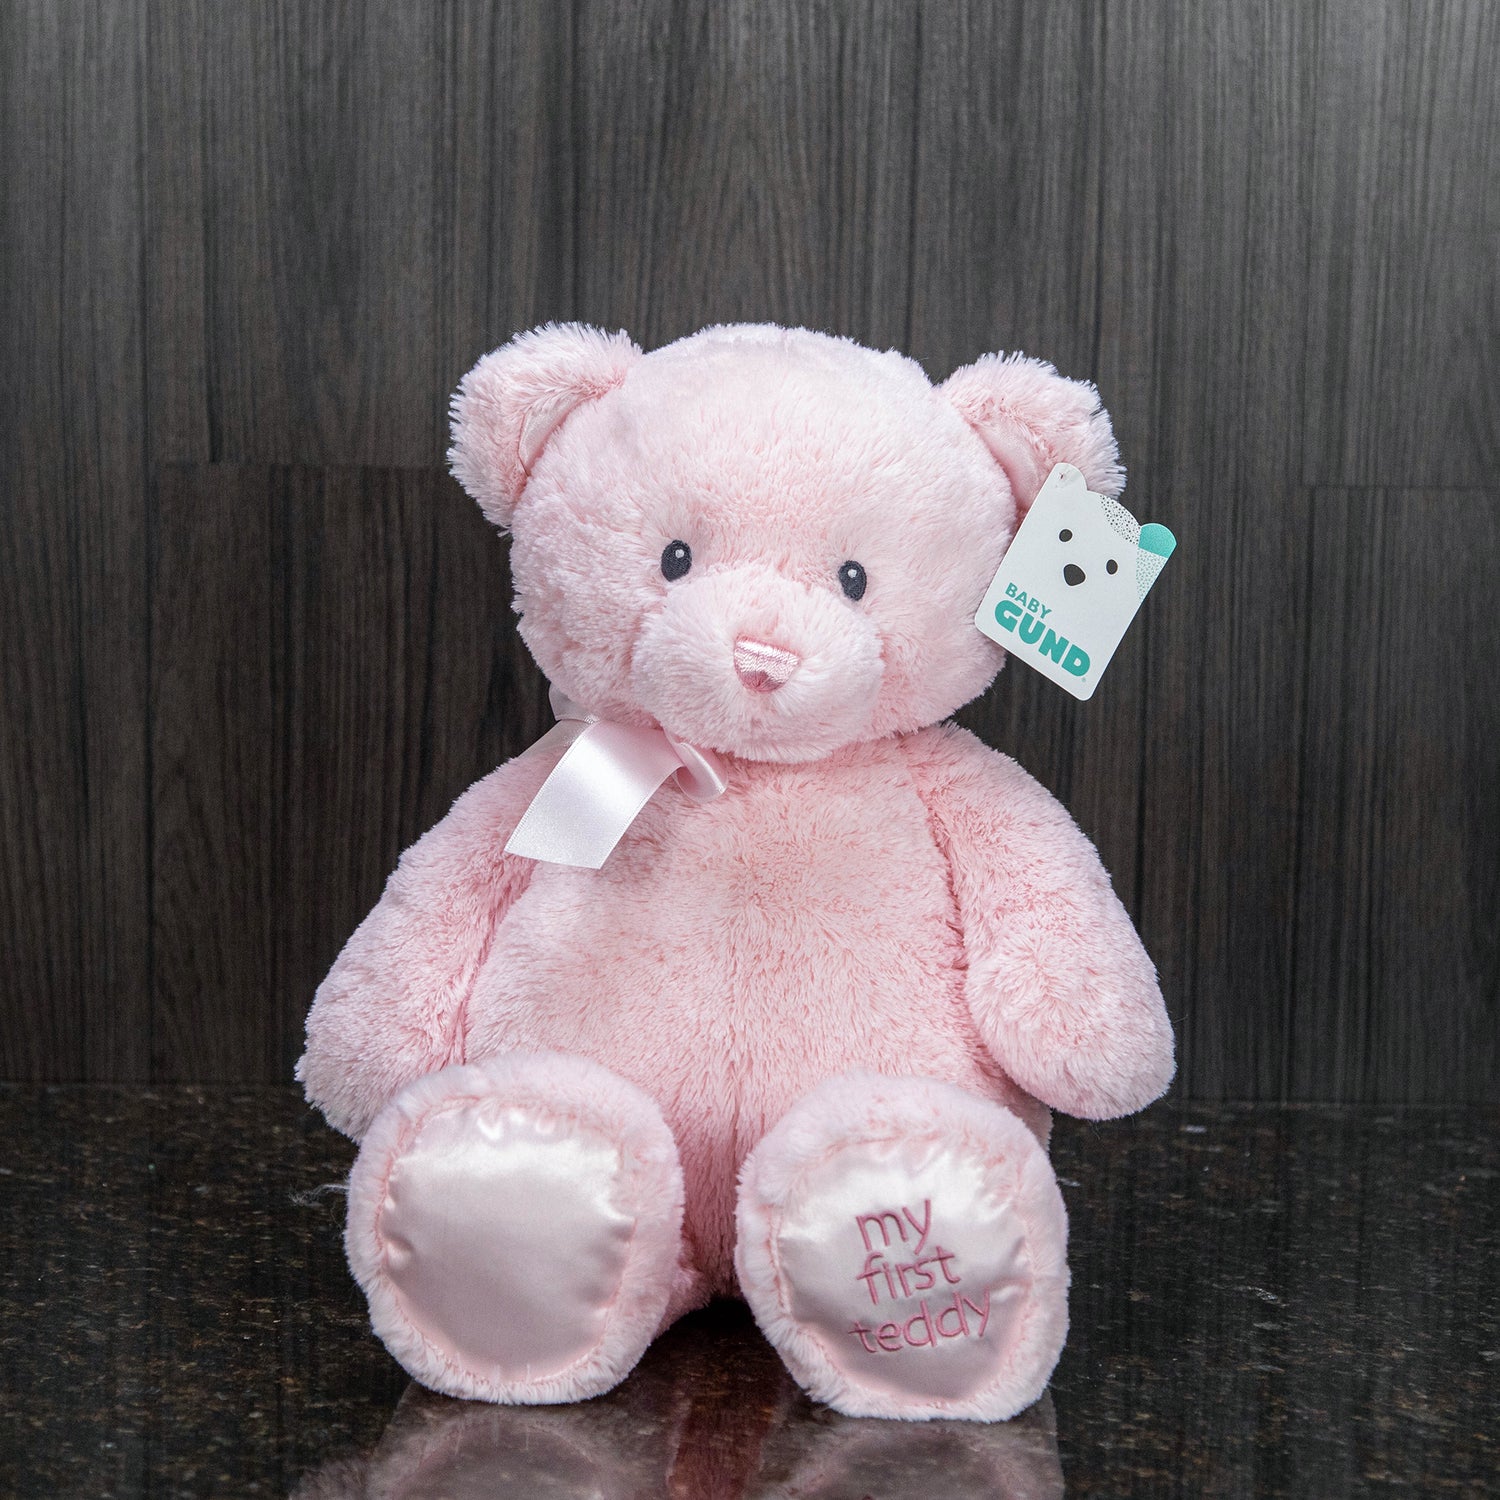 a blue teddy bear with "my first teddy" embroidered on its foot